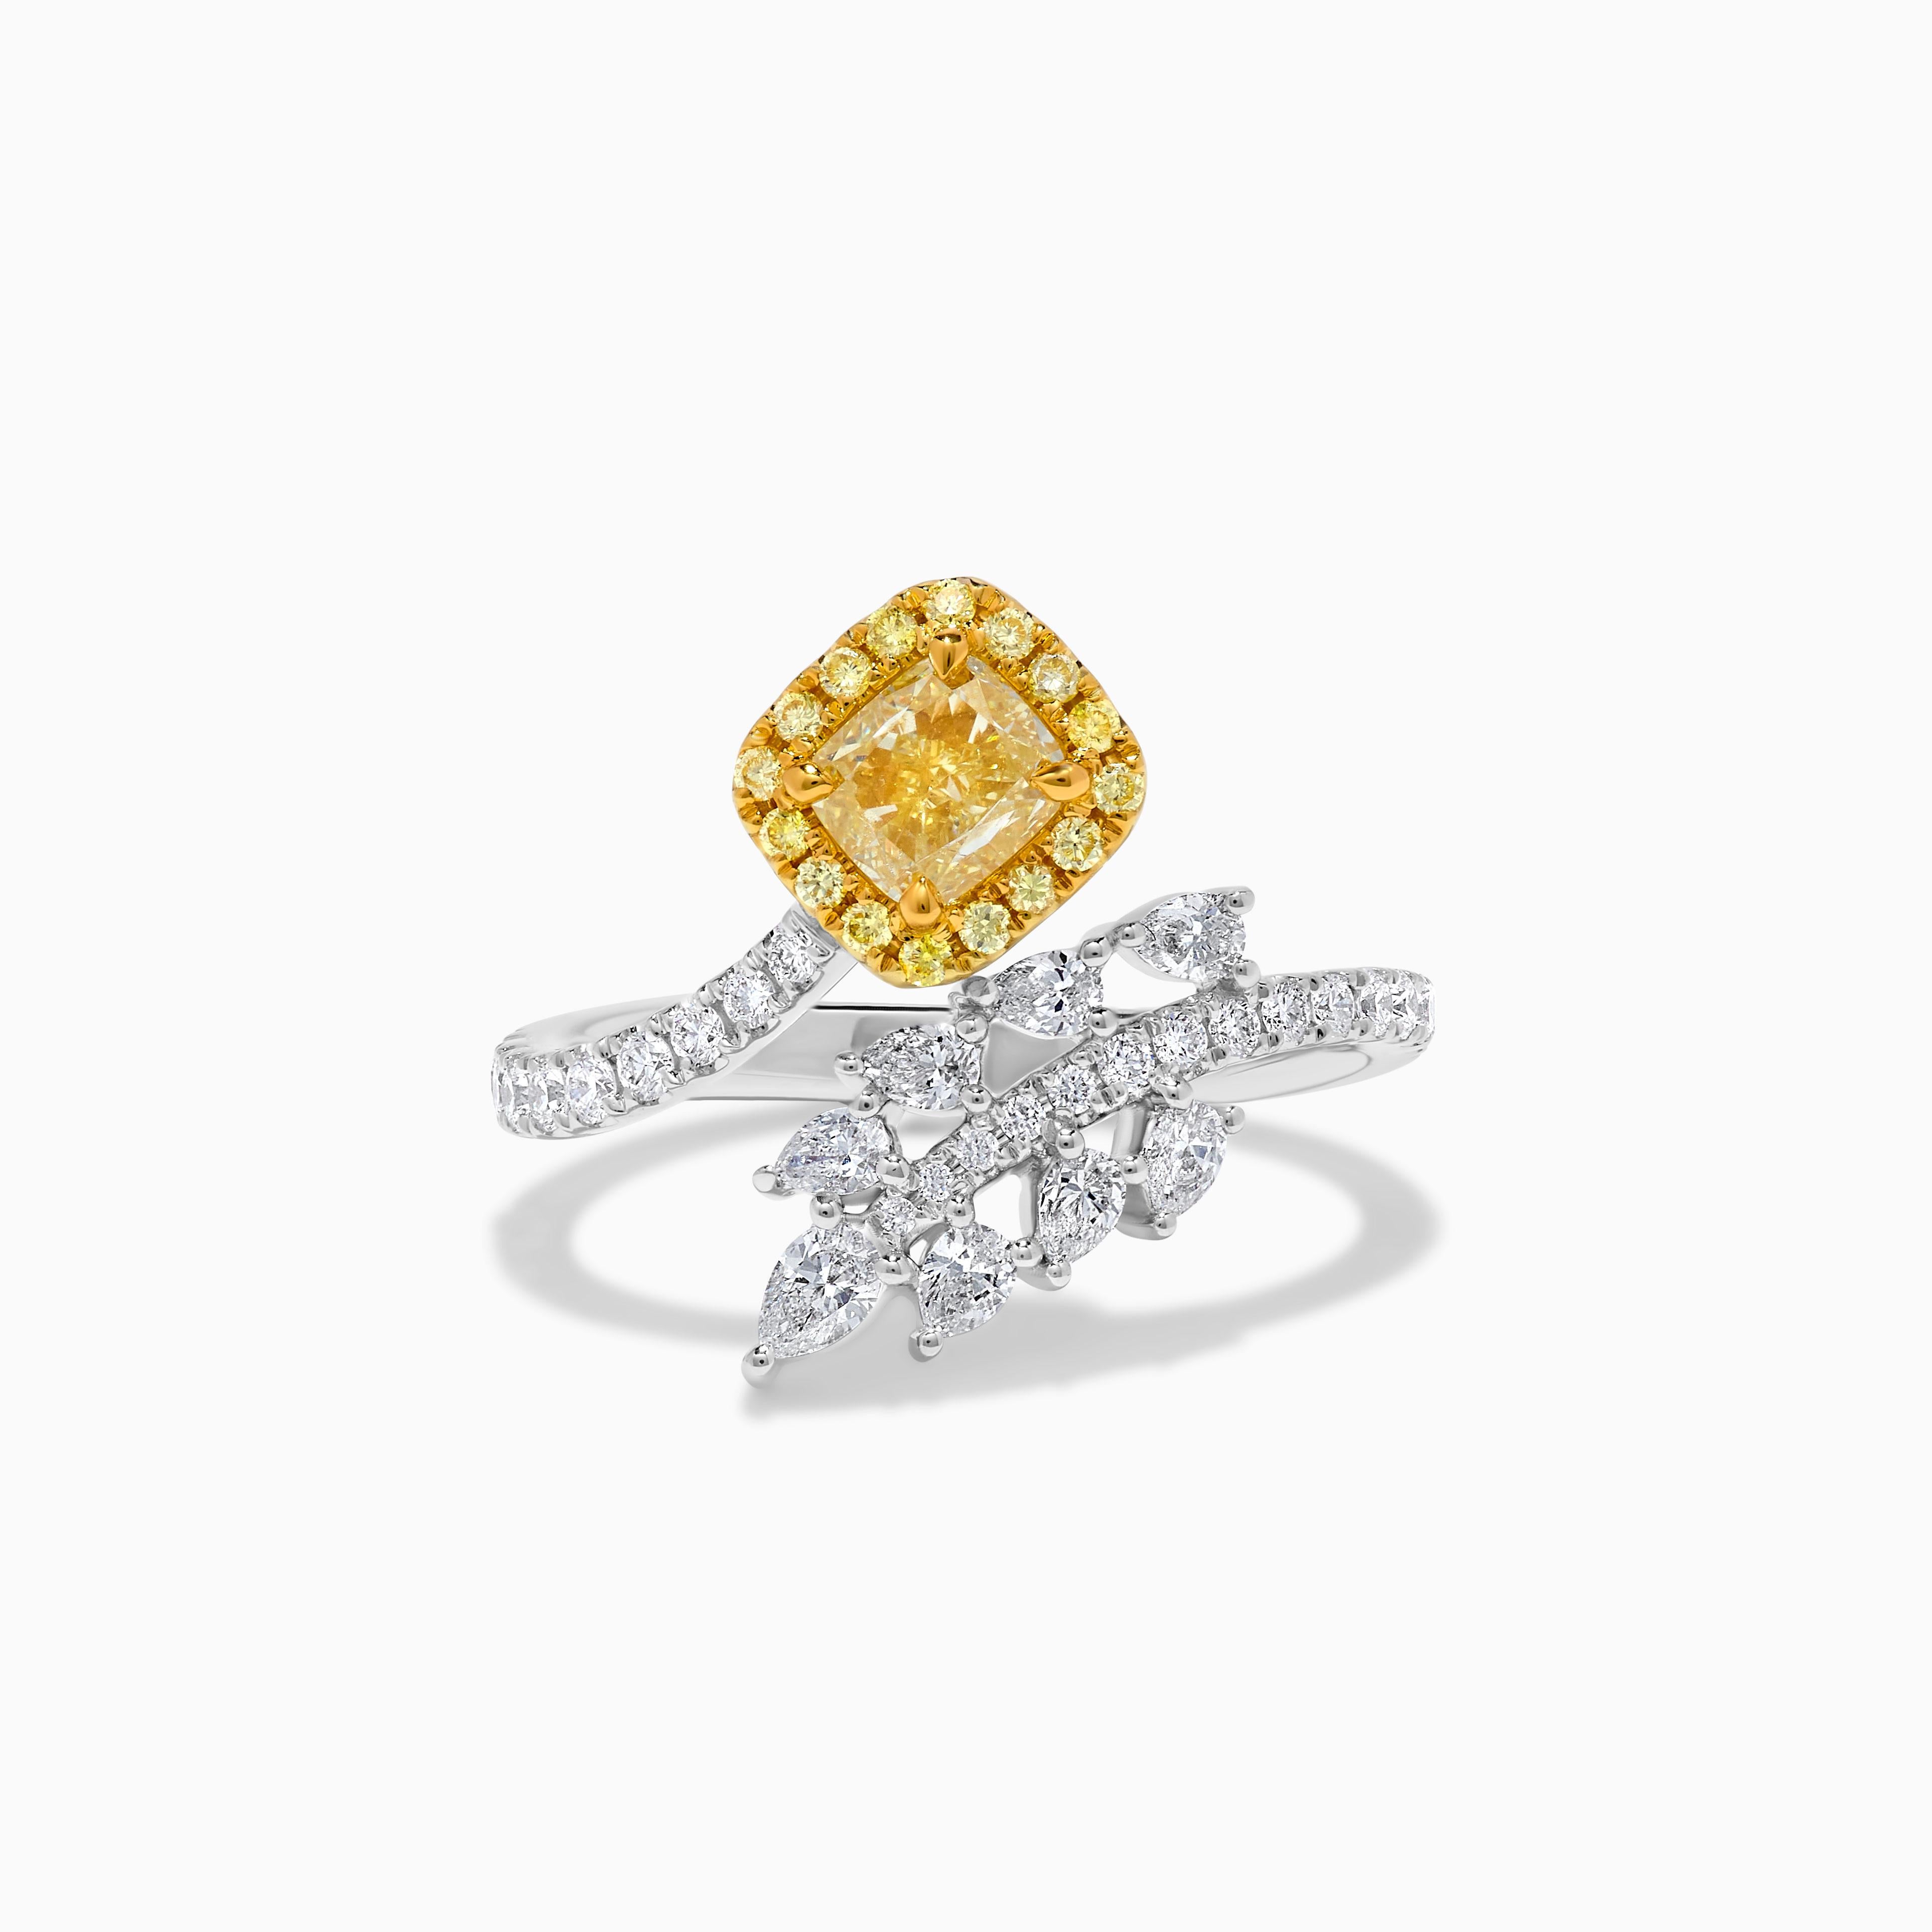 RareGemWorld's classic GIA certified diamond ring. Mounted in a beautiful 18K Yellow and White Gold setting with a natural cushion cut yellow diamond. The yellow diamond is surrounded by natural pear cut white diamonds, round natural yellow diamond